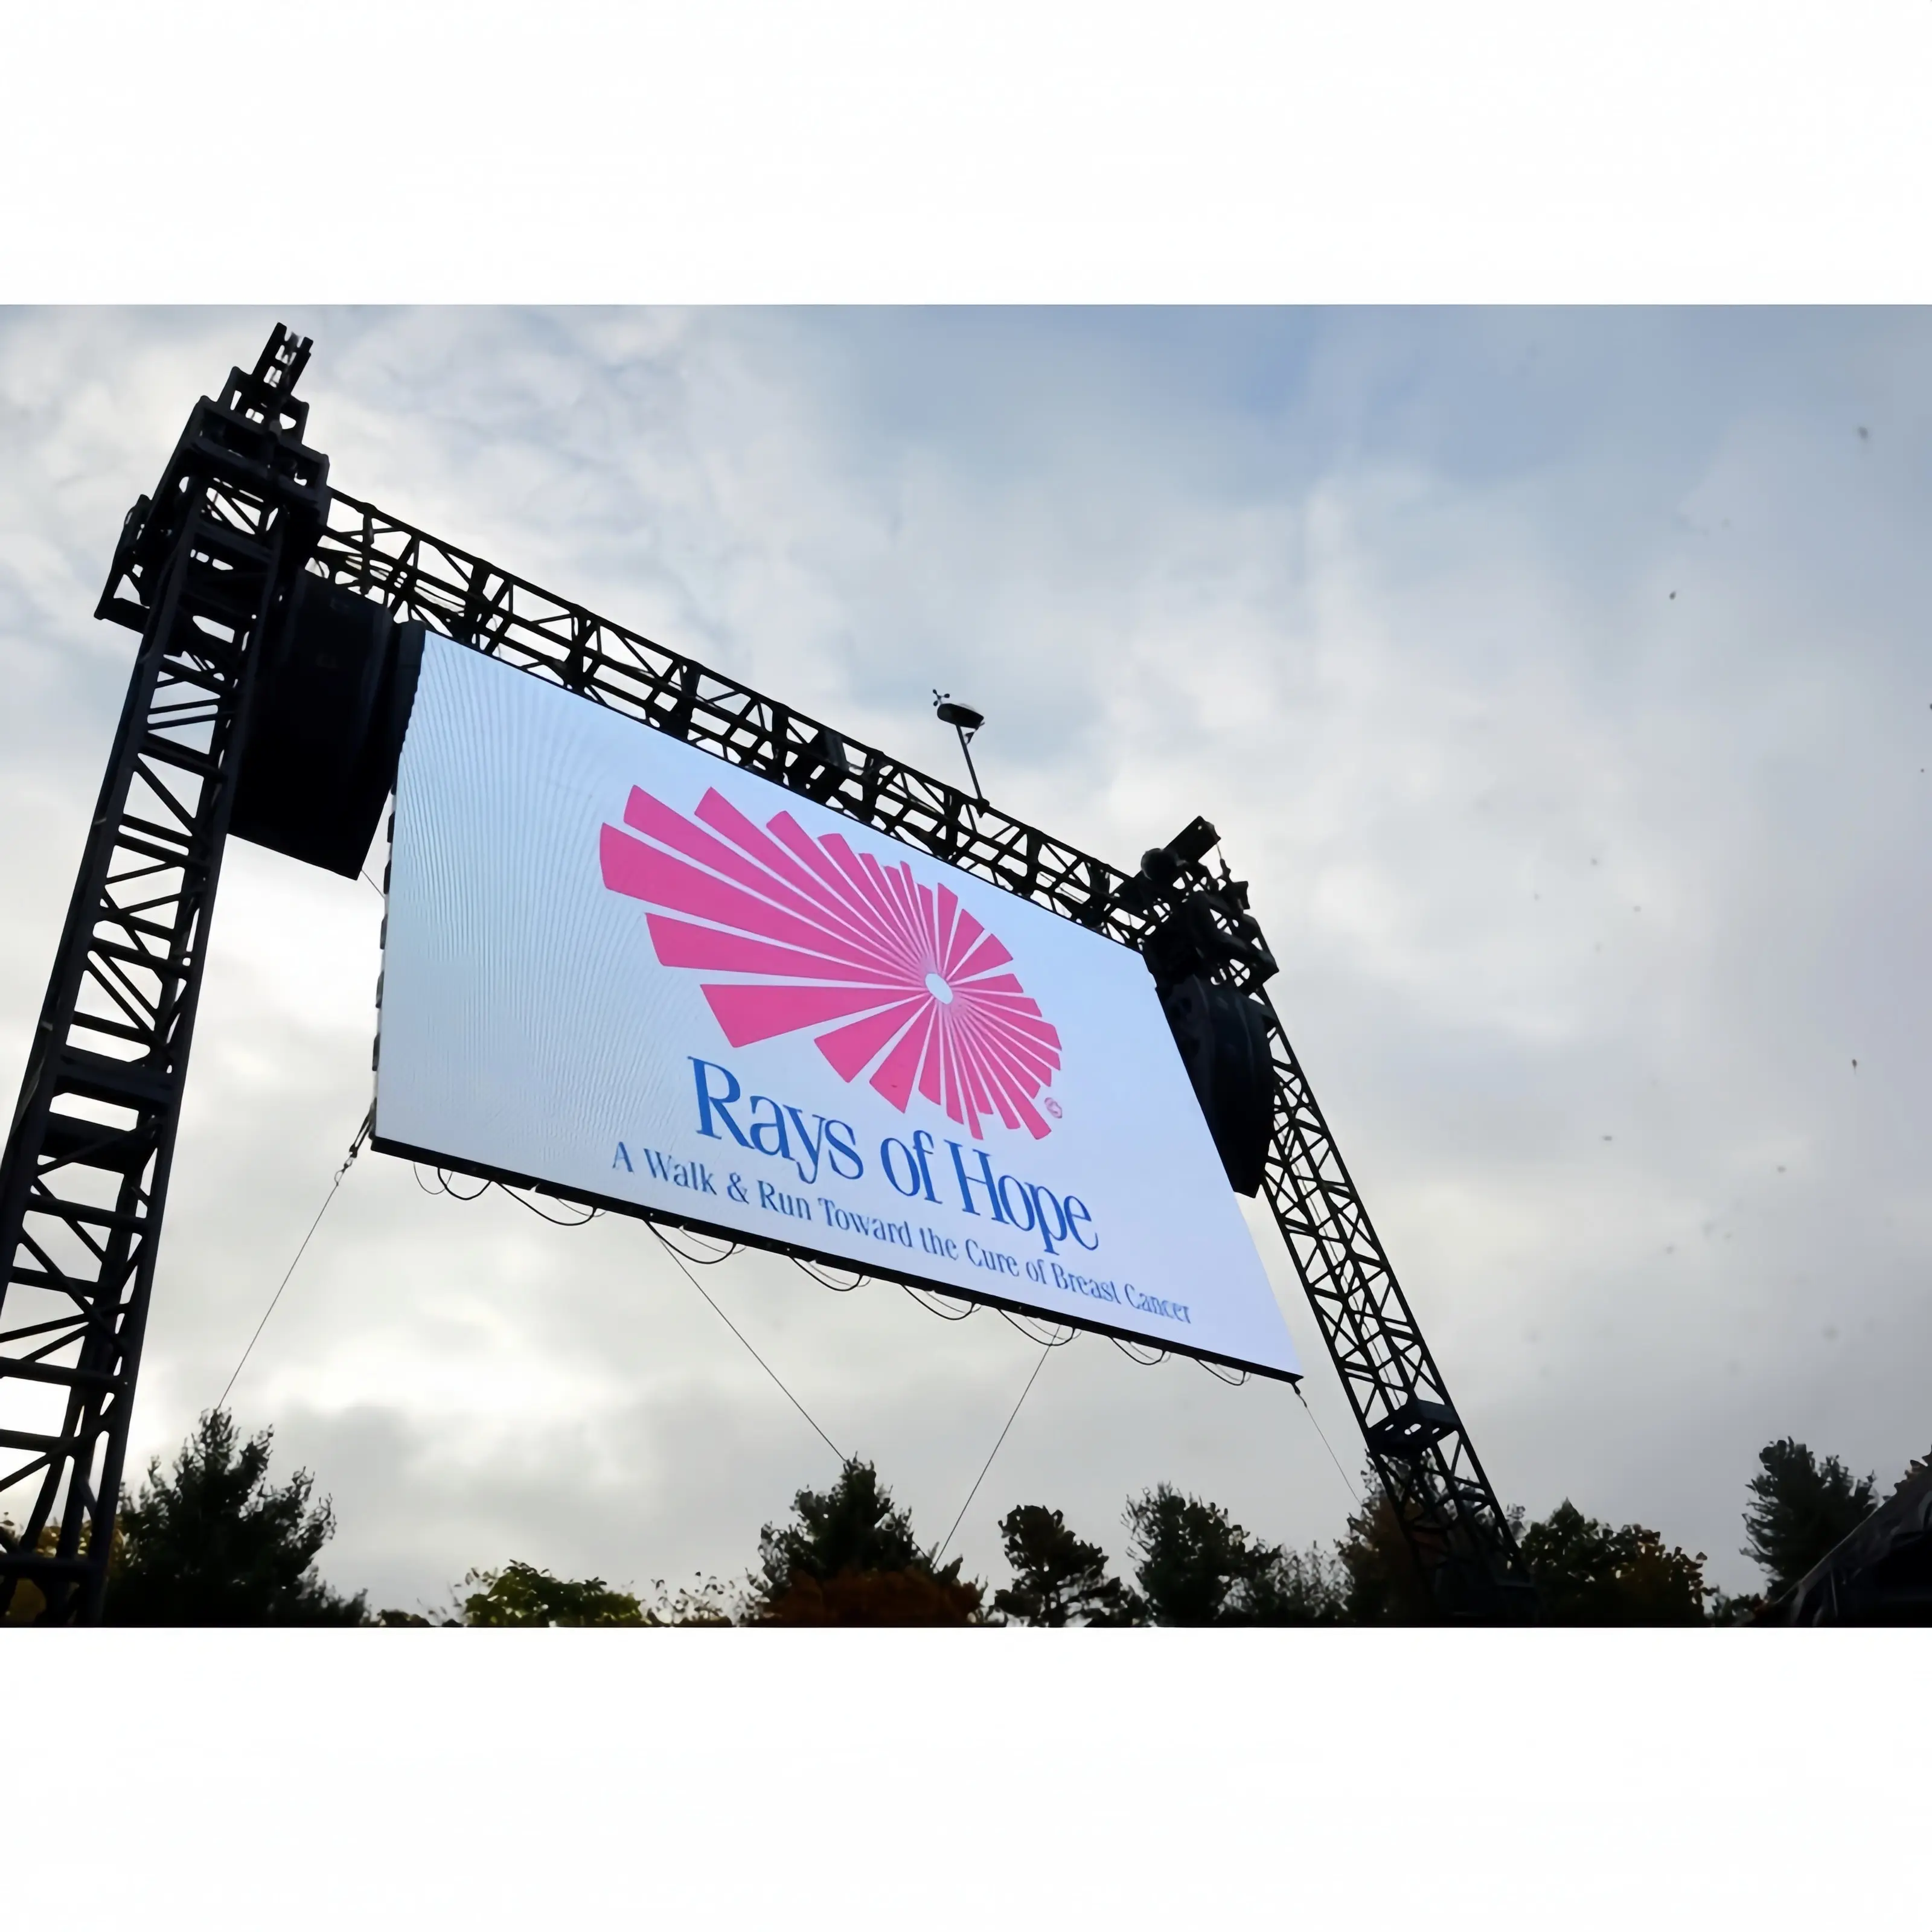 Indoor Concert Stage Led Screen Panels 3840hz Turnkey Solution Led Video Wall System Led Display Pantalla